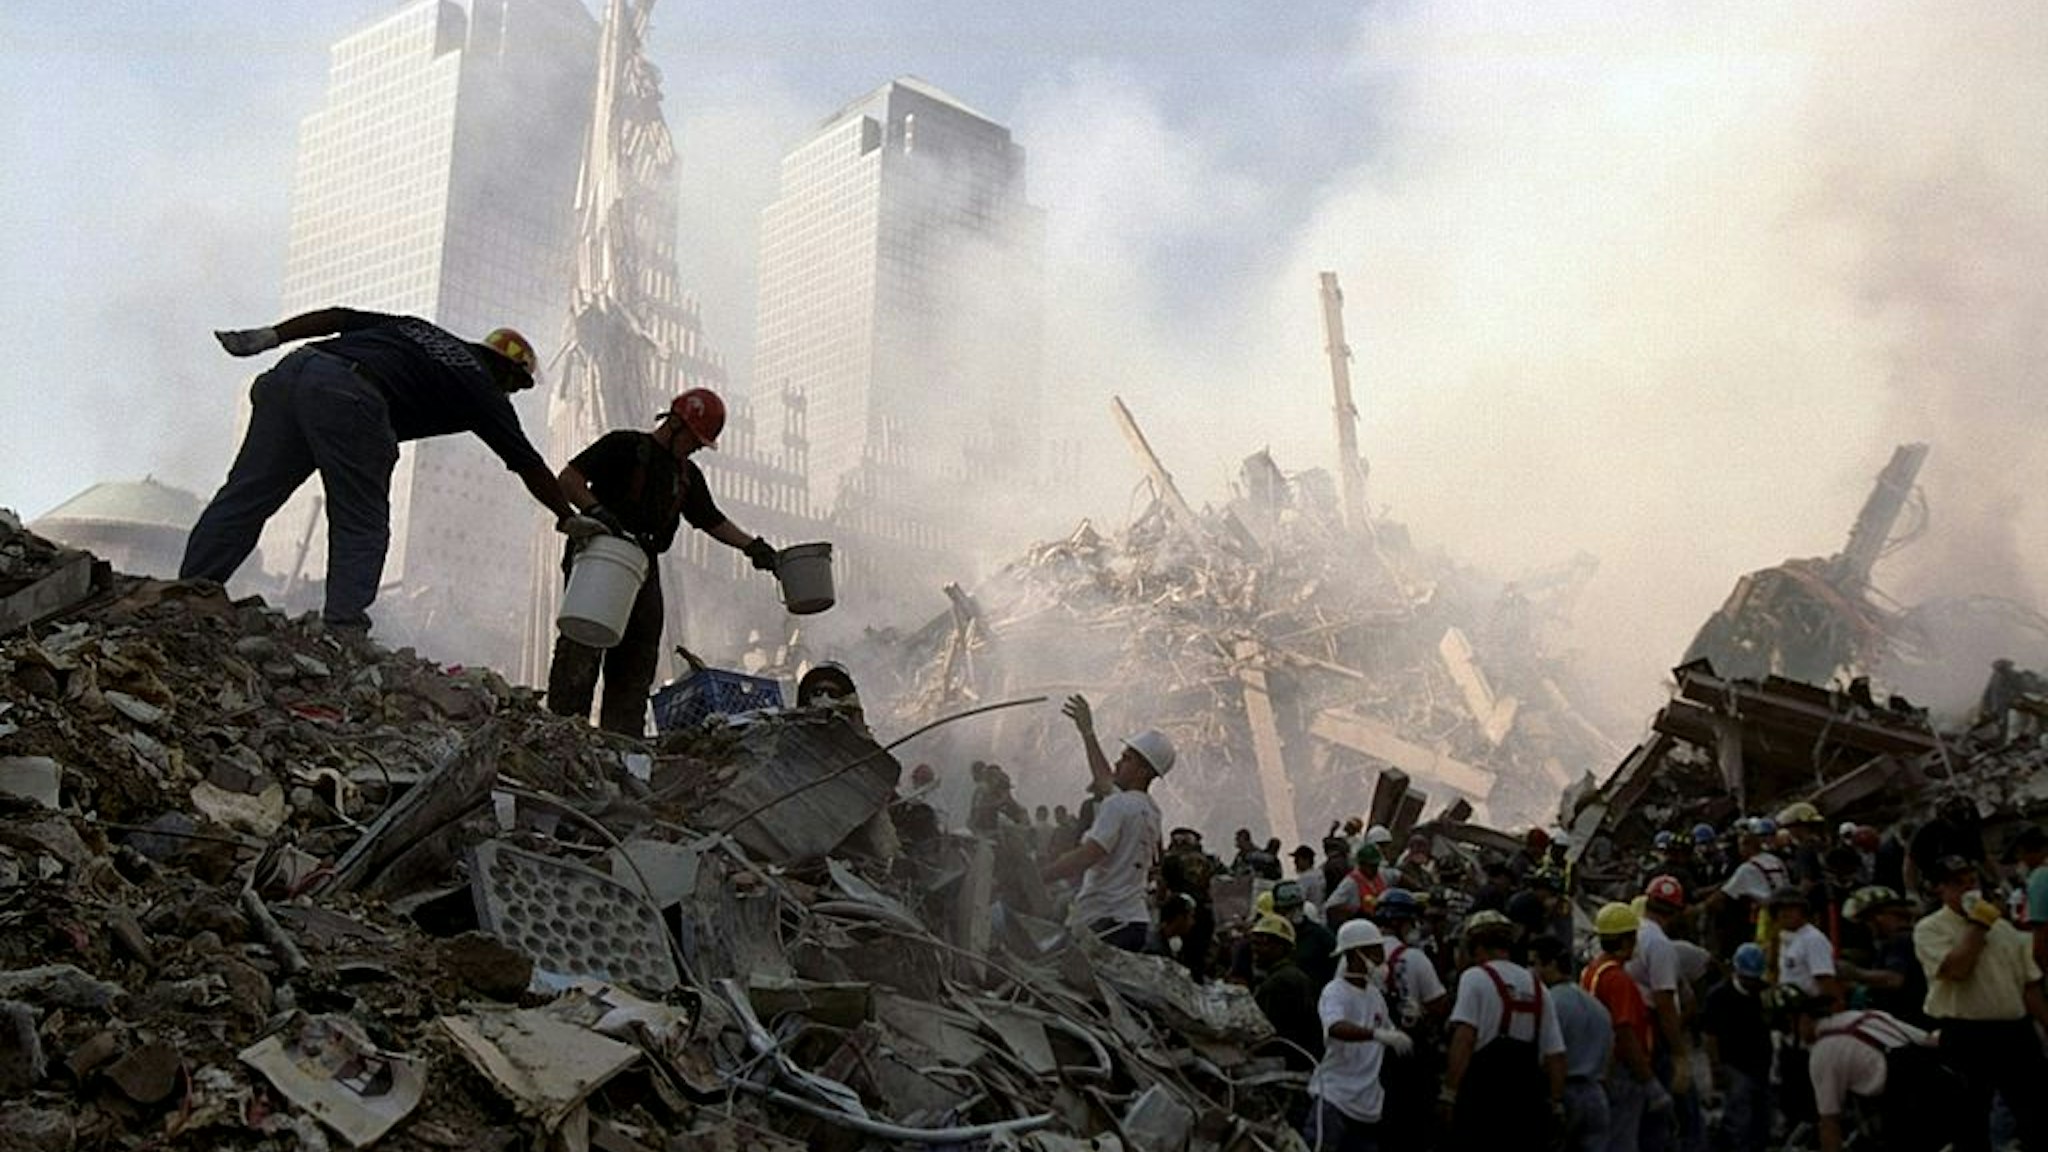 UNITED STATES - SEPTEMBER 13: Rescuers work to free a victim from under the rubble at the site of the World Trade Center, demolished in a terrorist attack.